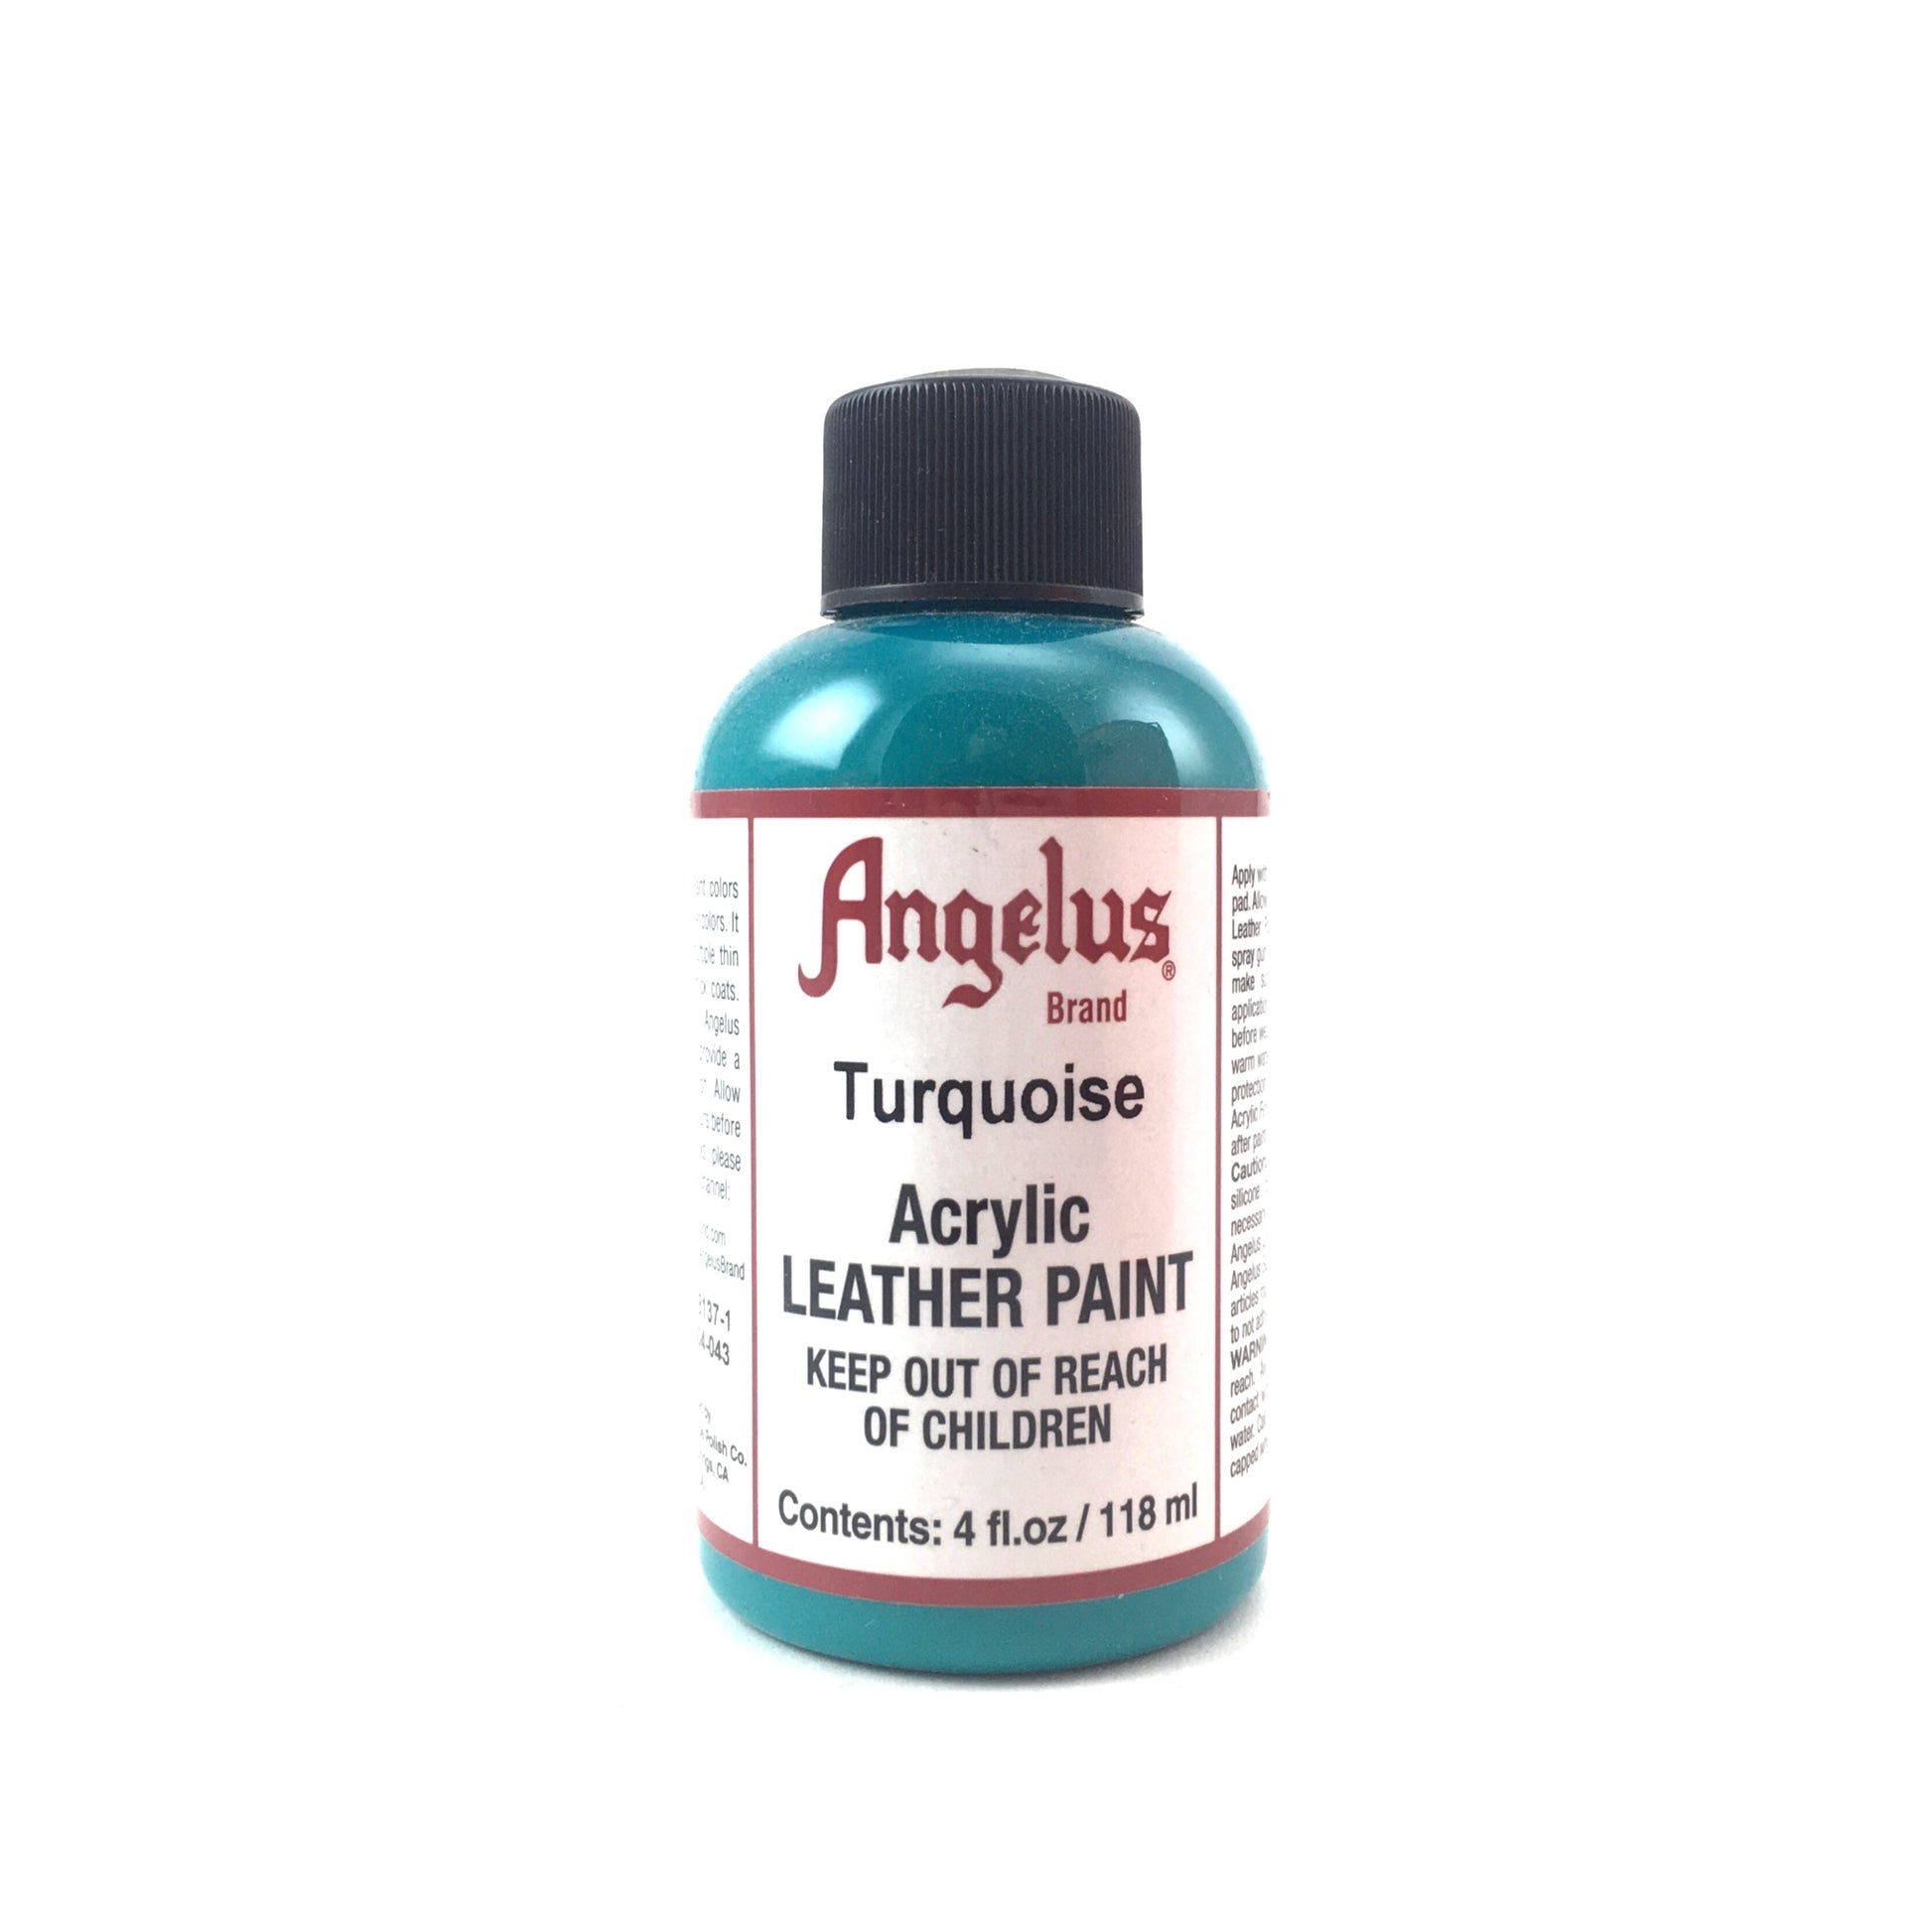 Angelus Acrylic Leather Paint - 4 oz. - Matte Turquoise by Angelus - K. A. Artist Shop